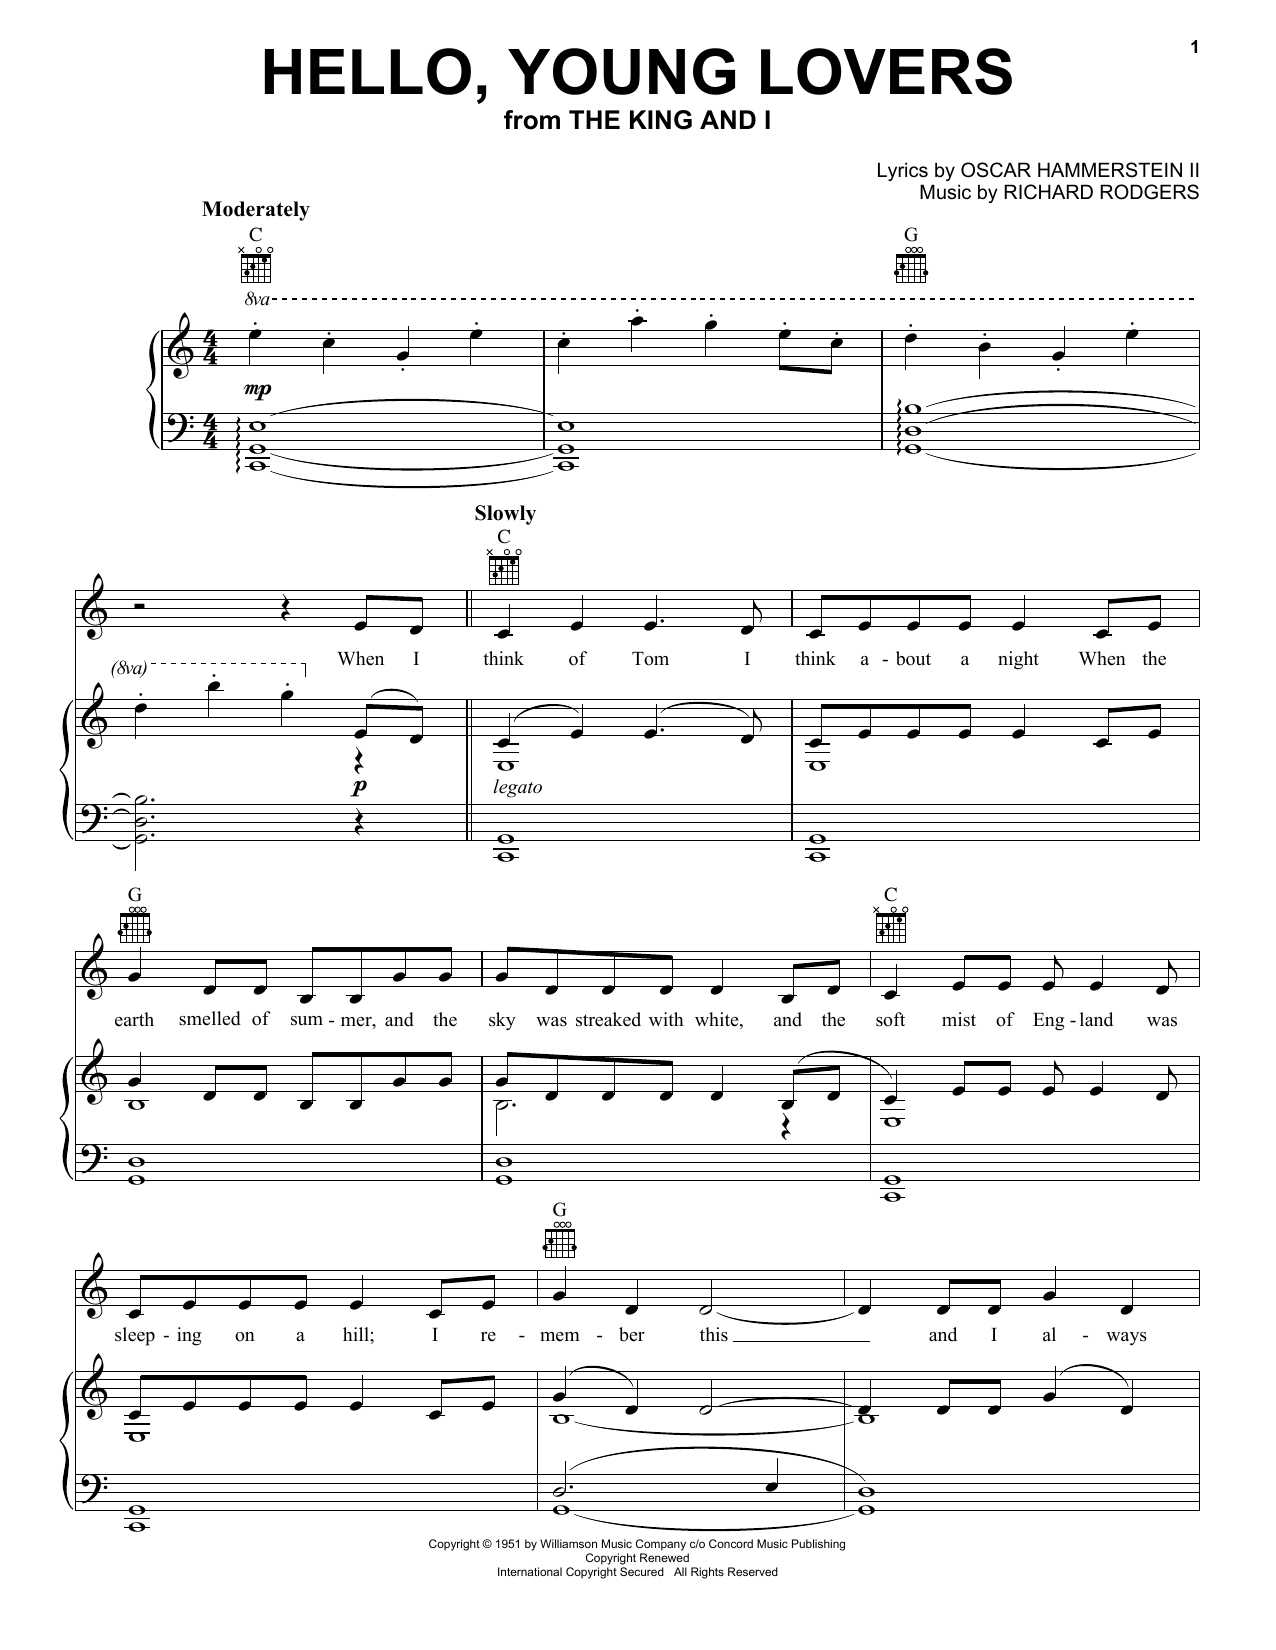 Download Rodgers & Hammerstein Hello, Young Lovers Sheet Music